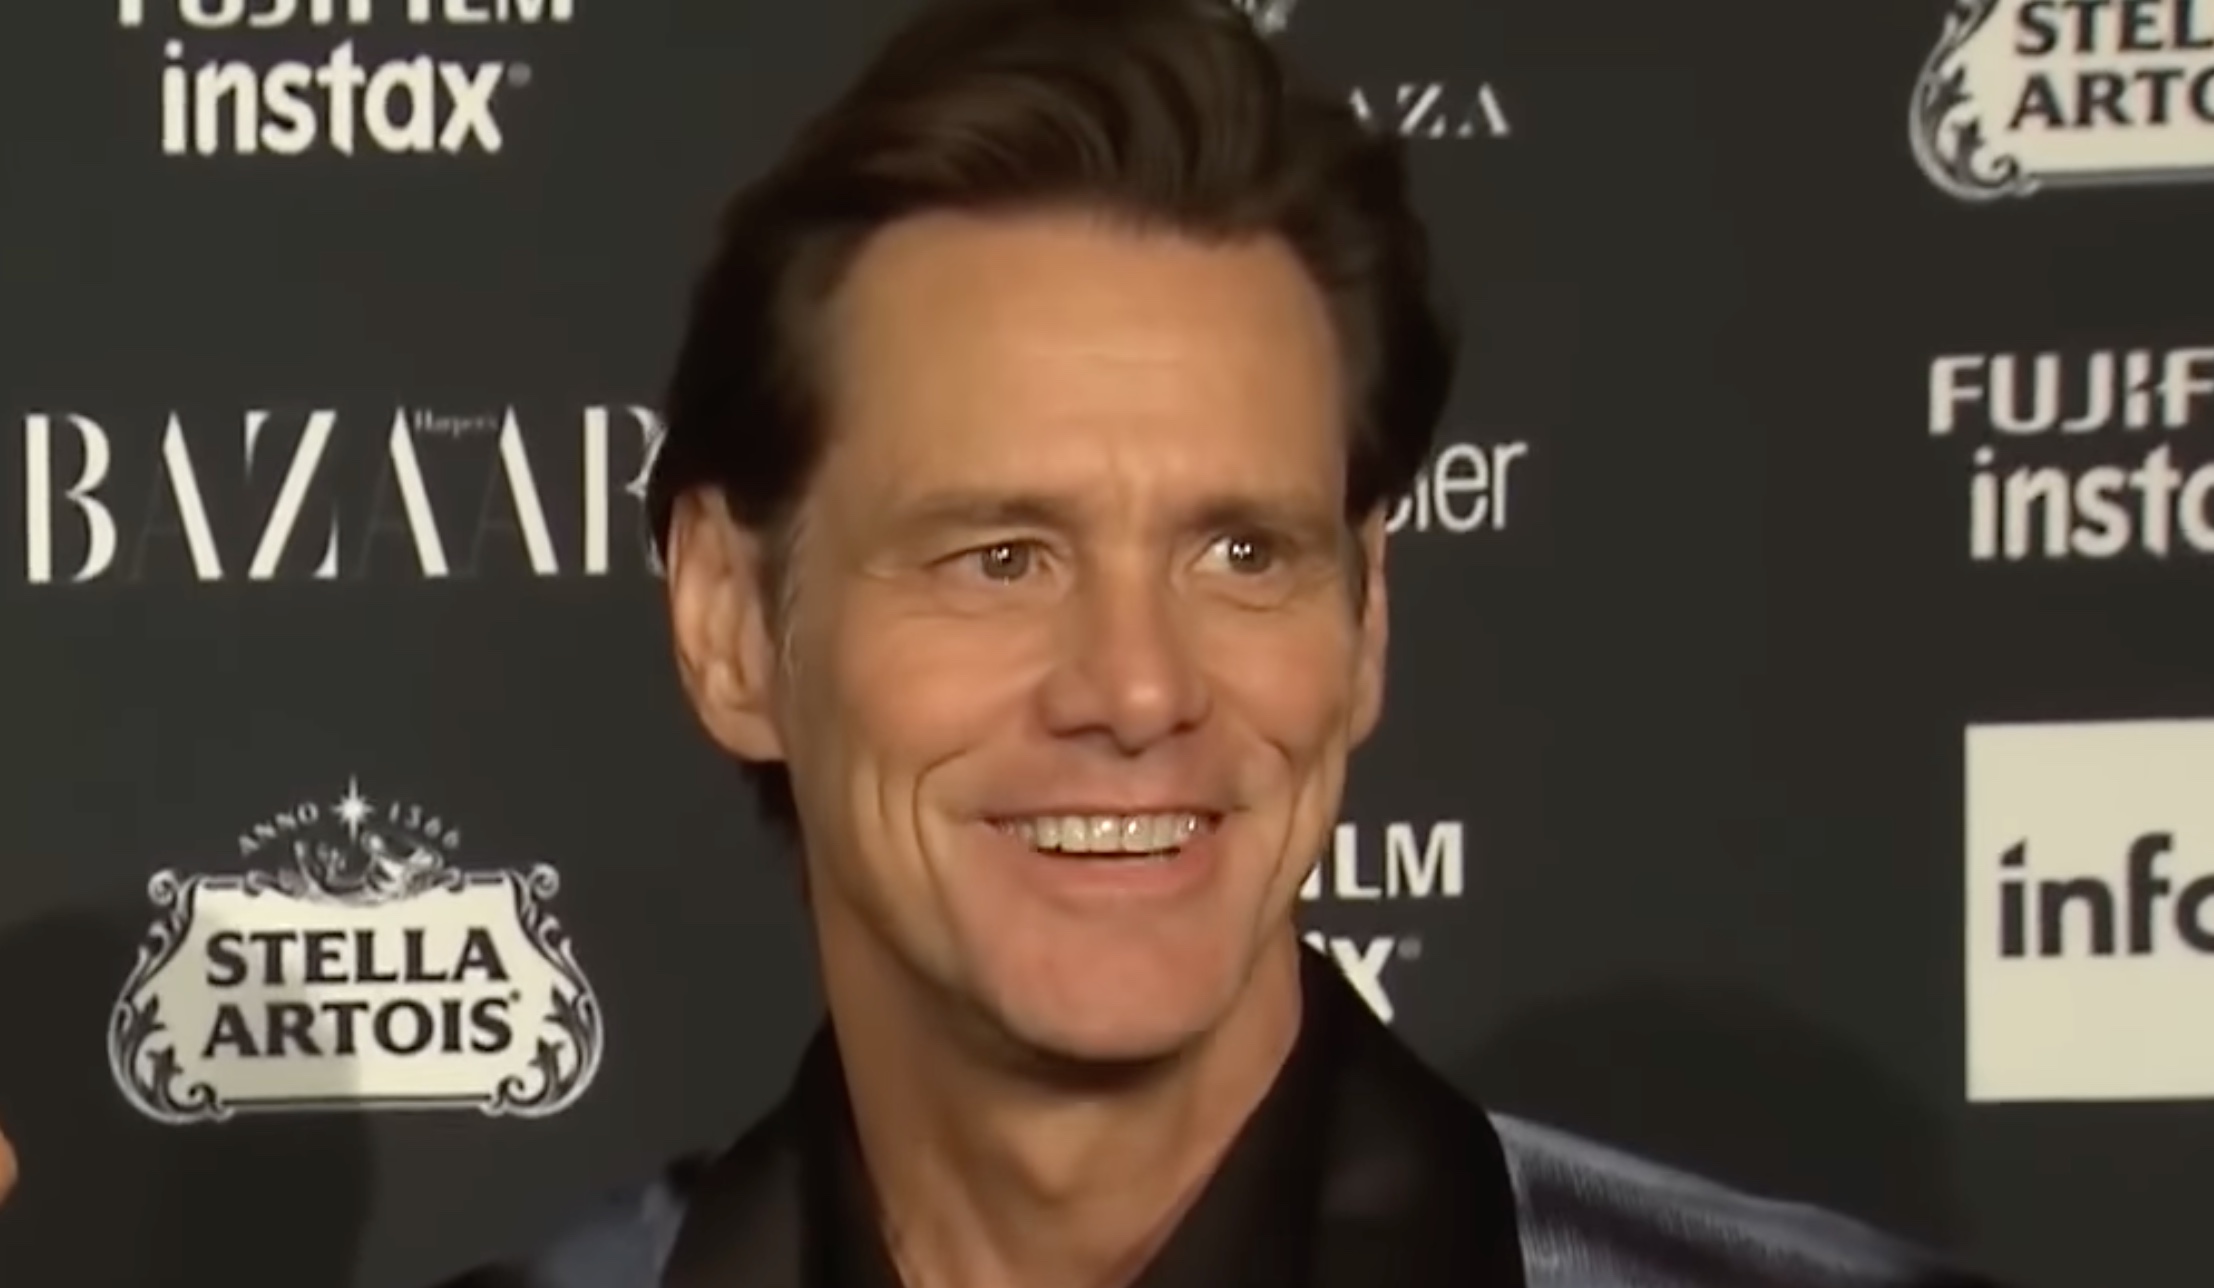 Jim Carrey’s birthday dinner was the ultimate comedy MVP photo op